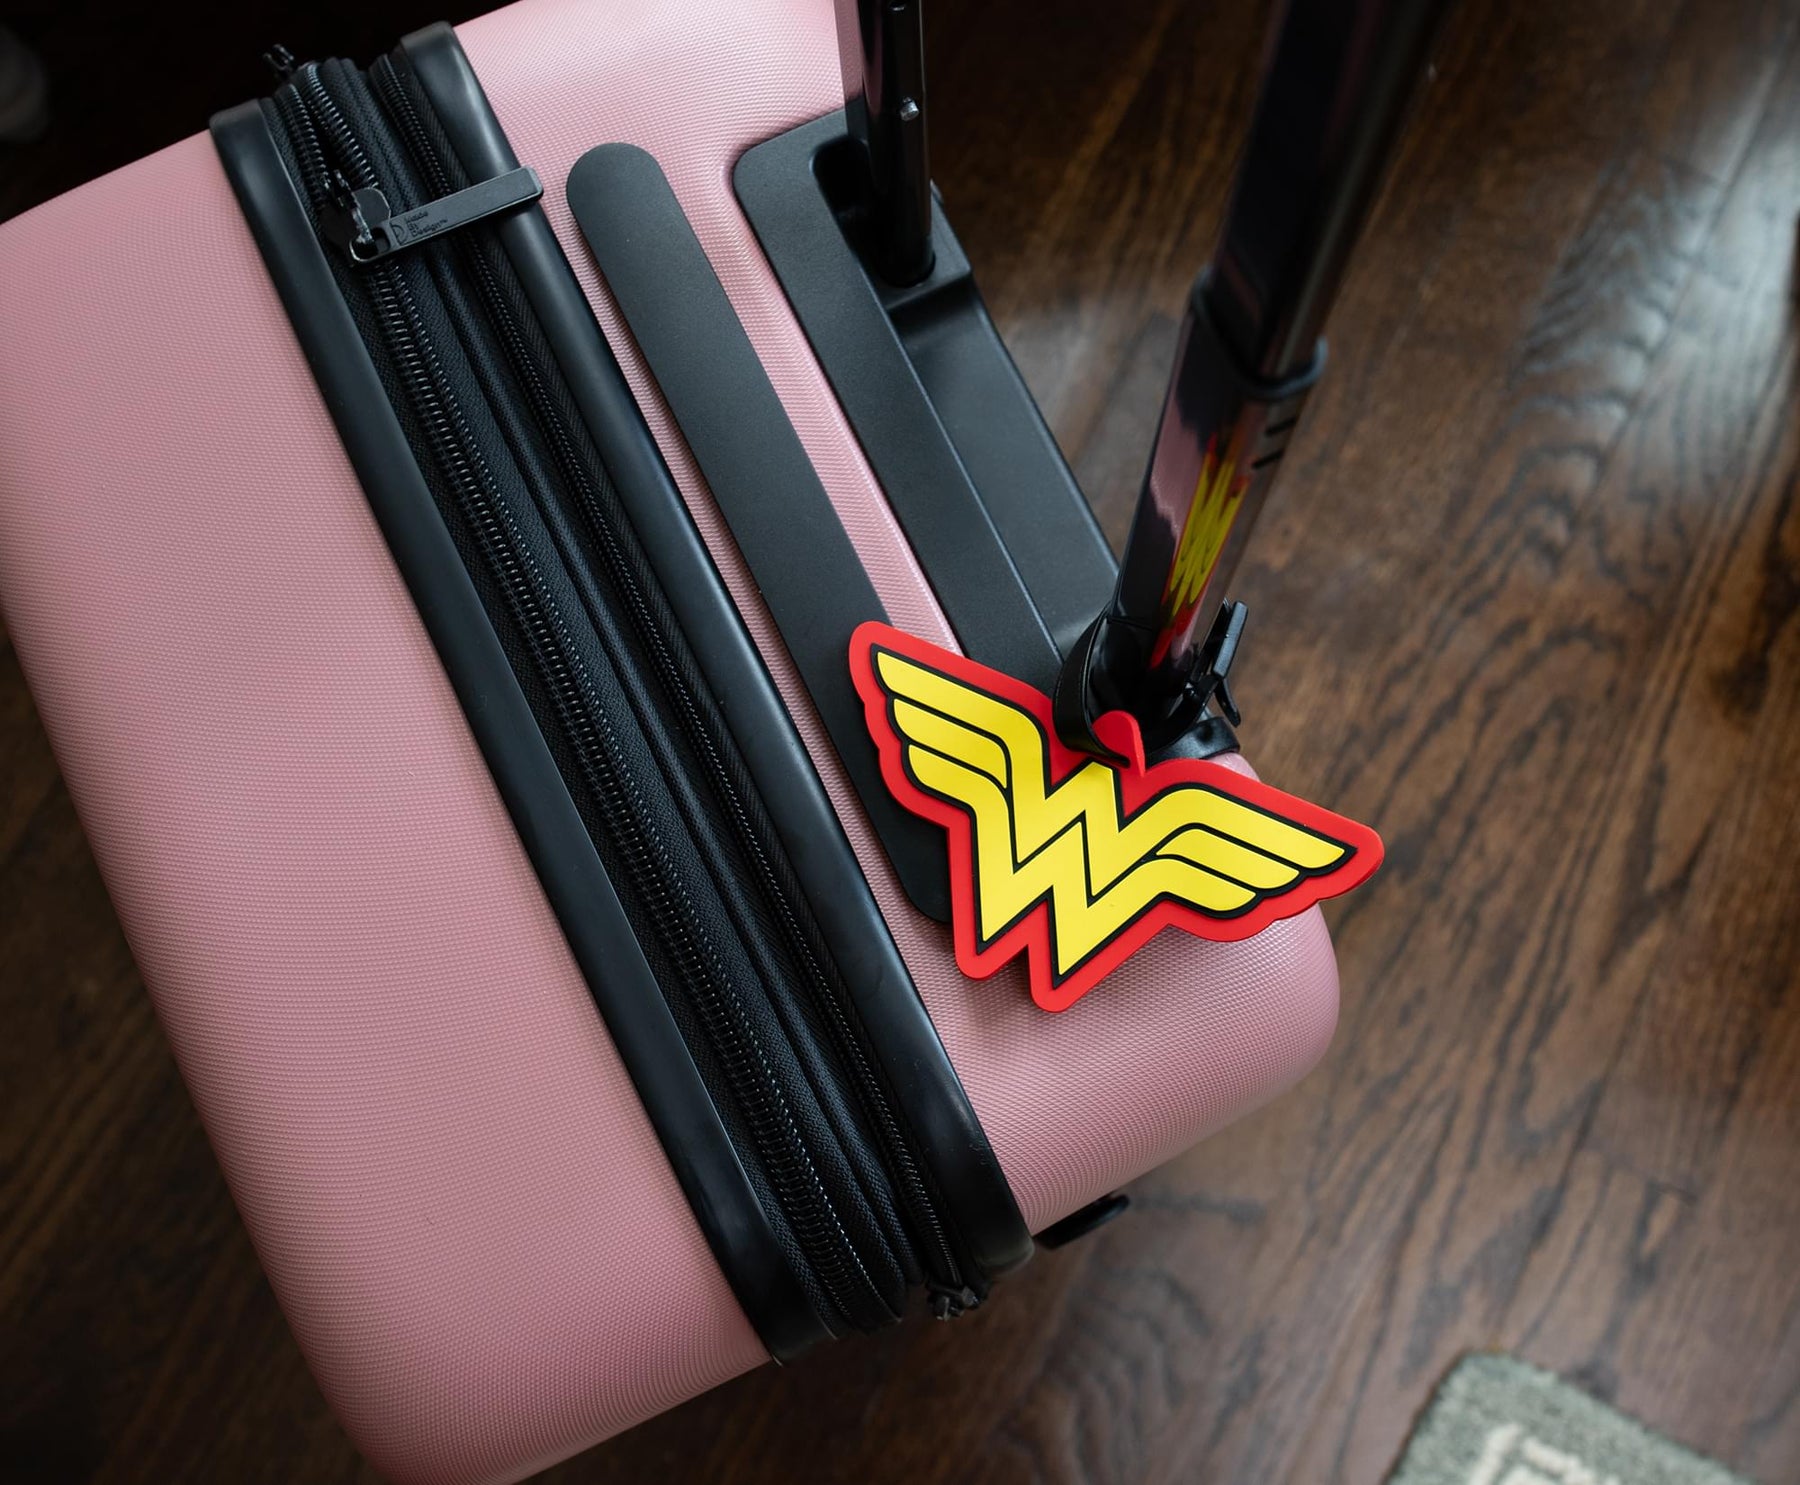 DC Comics Wonder Woman Logo Travel Luggage Tag With Suitcase ID Card Label